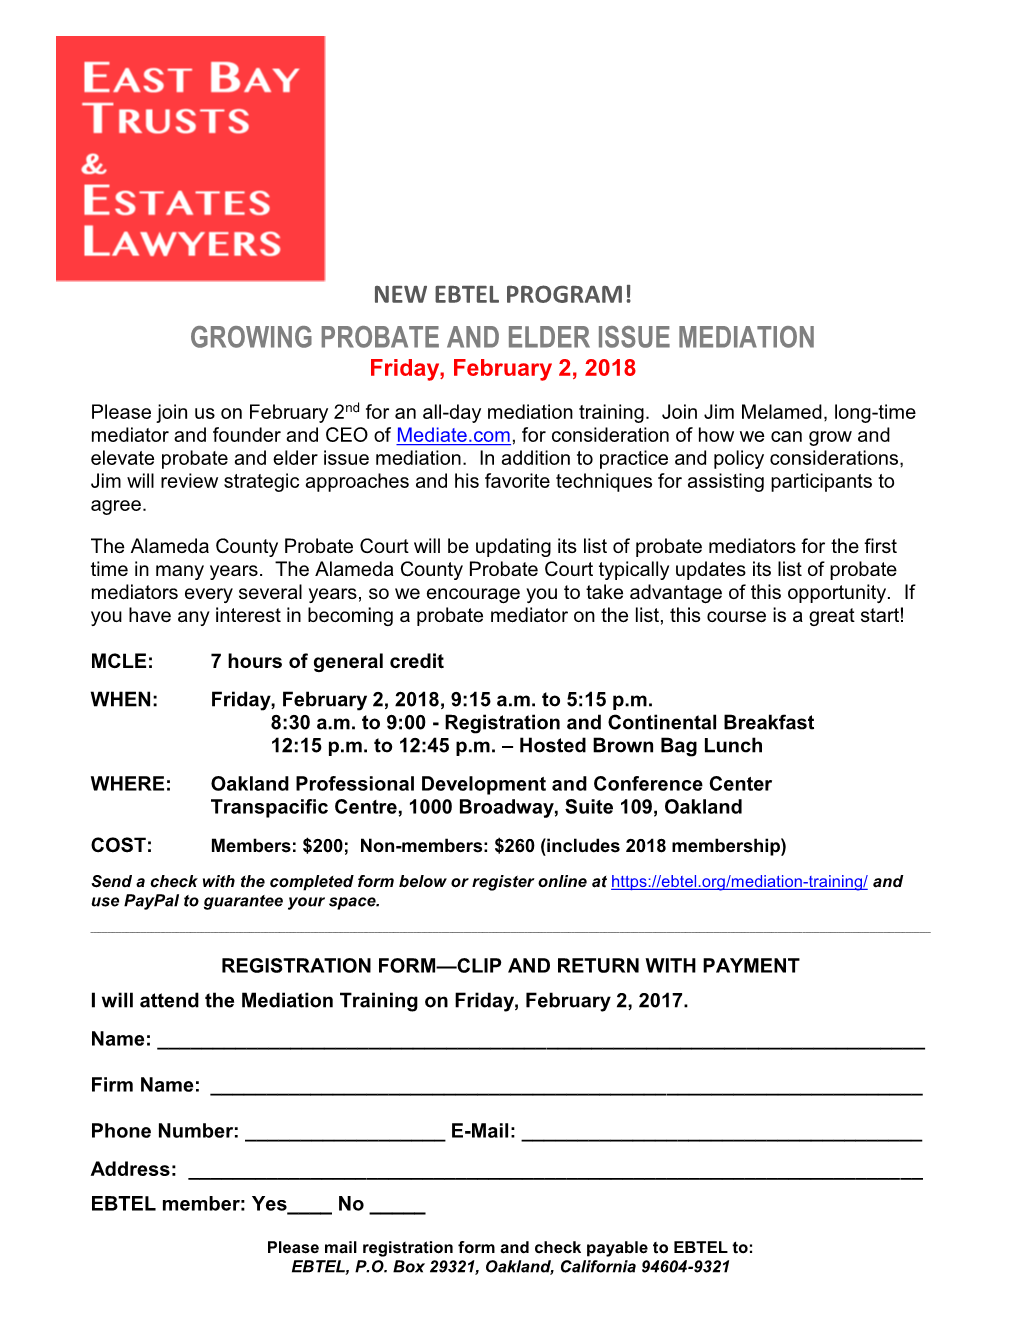 GROWING PROBATE and ELDER ISSUE MEDIATION Friday, February 2, 2018